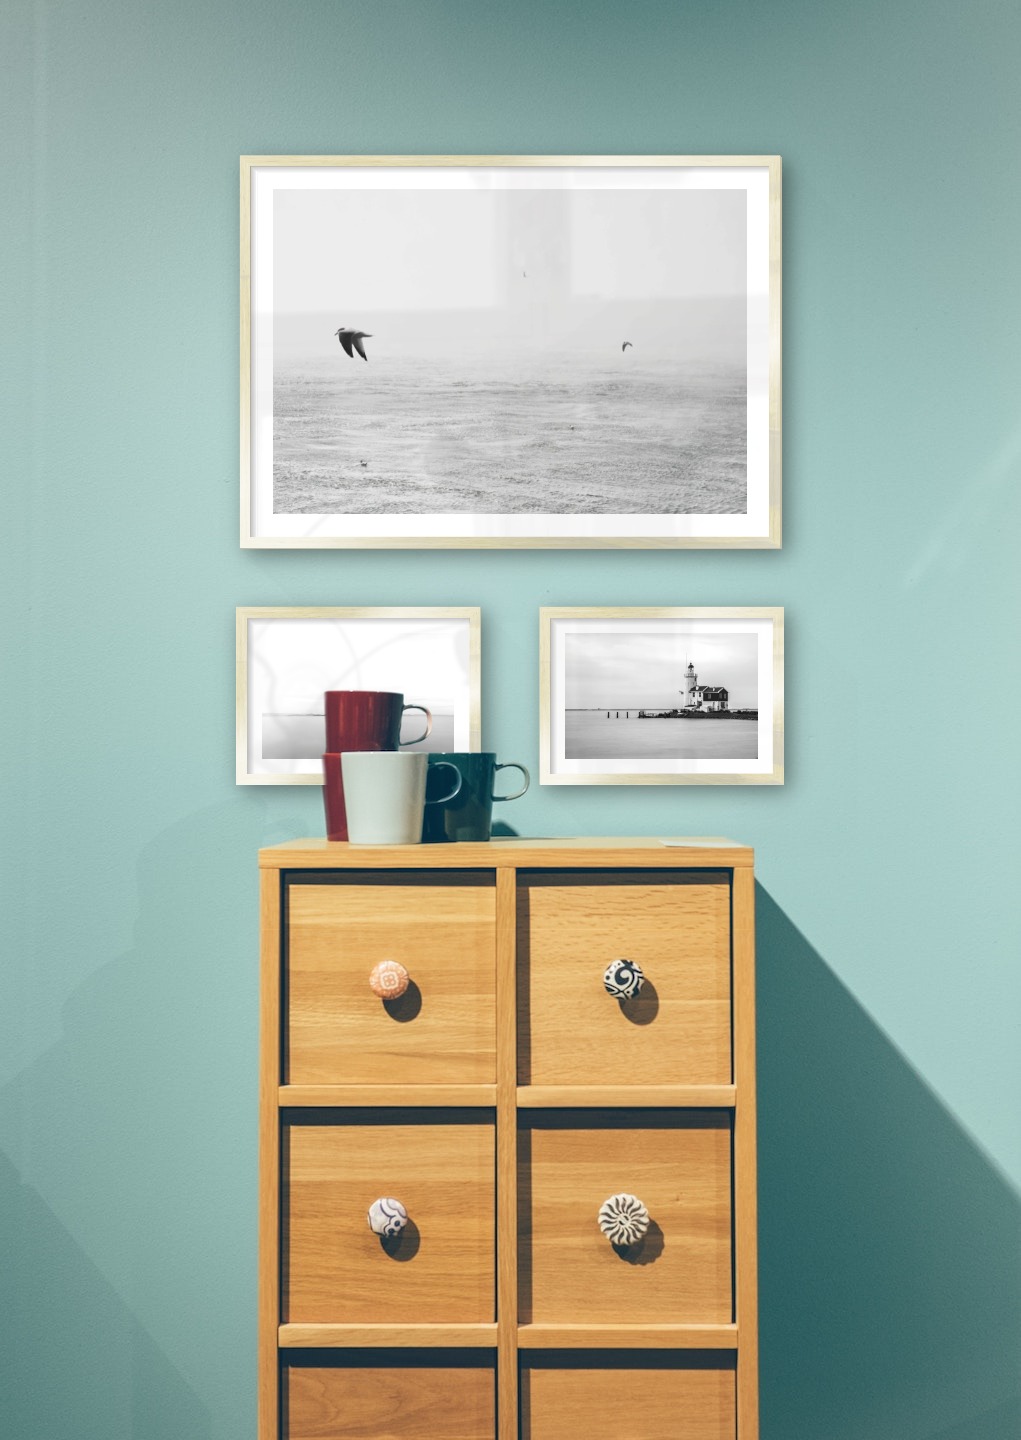 Gallery wall with picture frames in gold in sizes 50x70 and 21x30 with prints "Birds over the sea", "Pillars in the water" and "Pier with building"